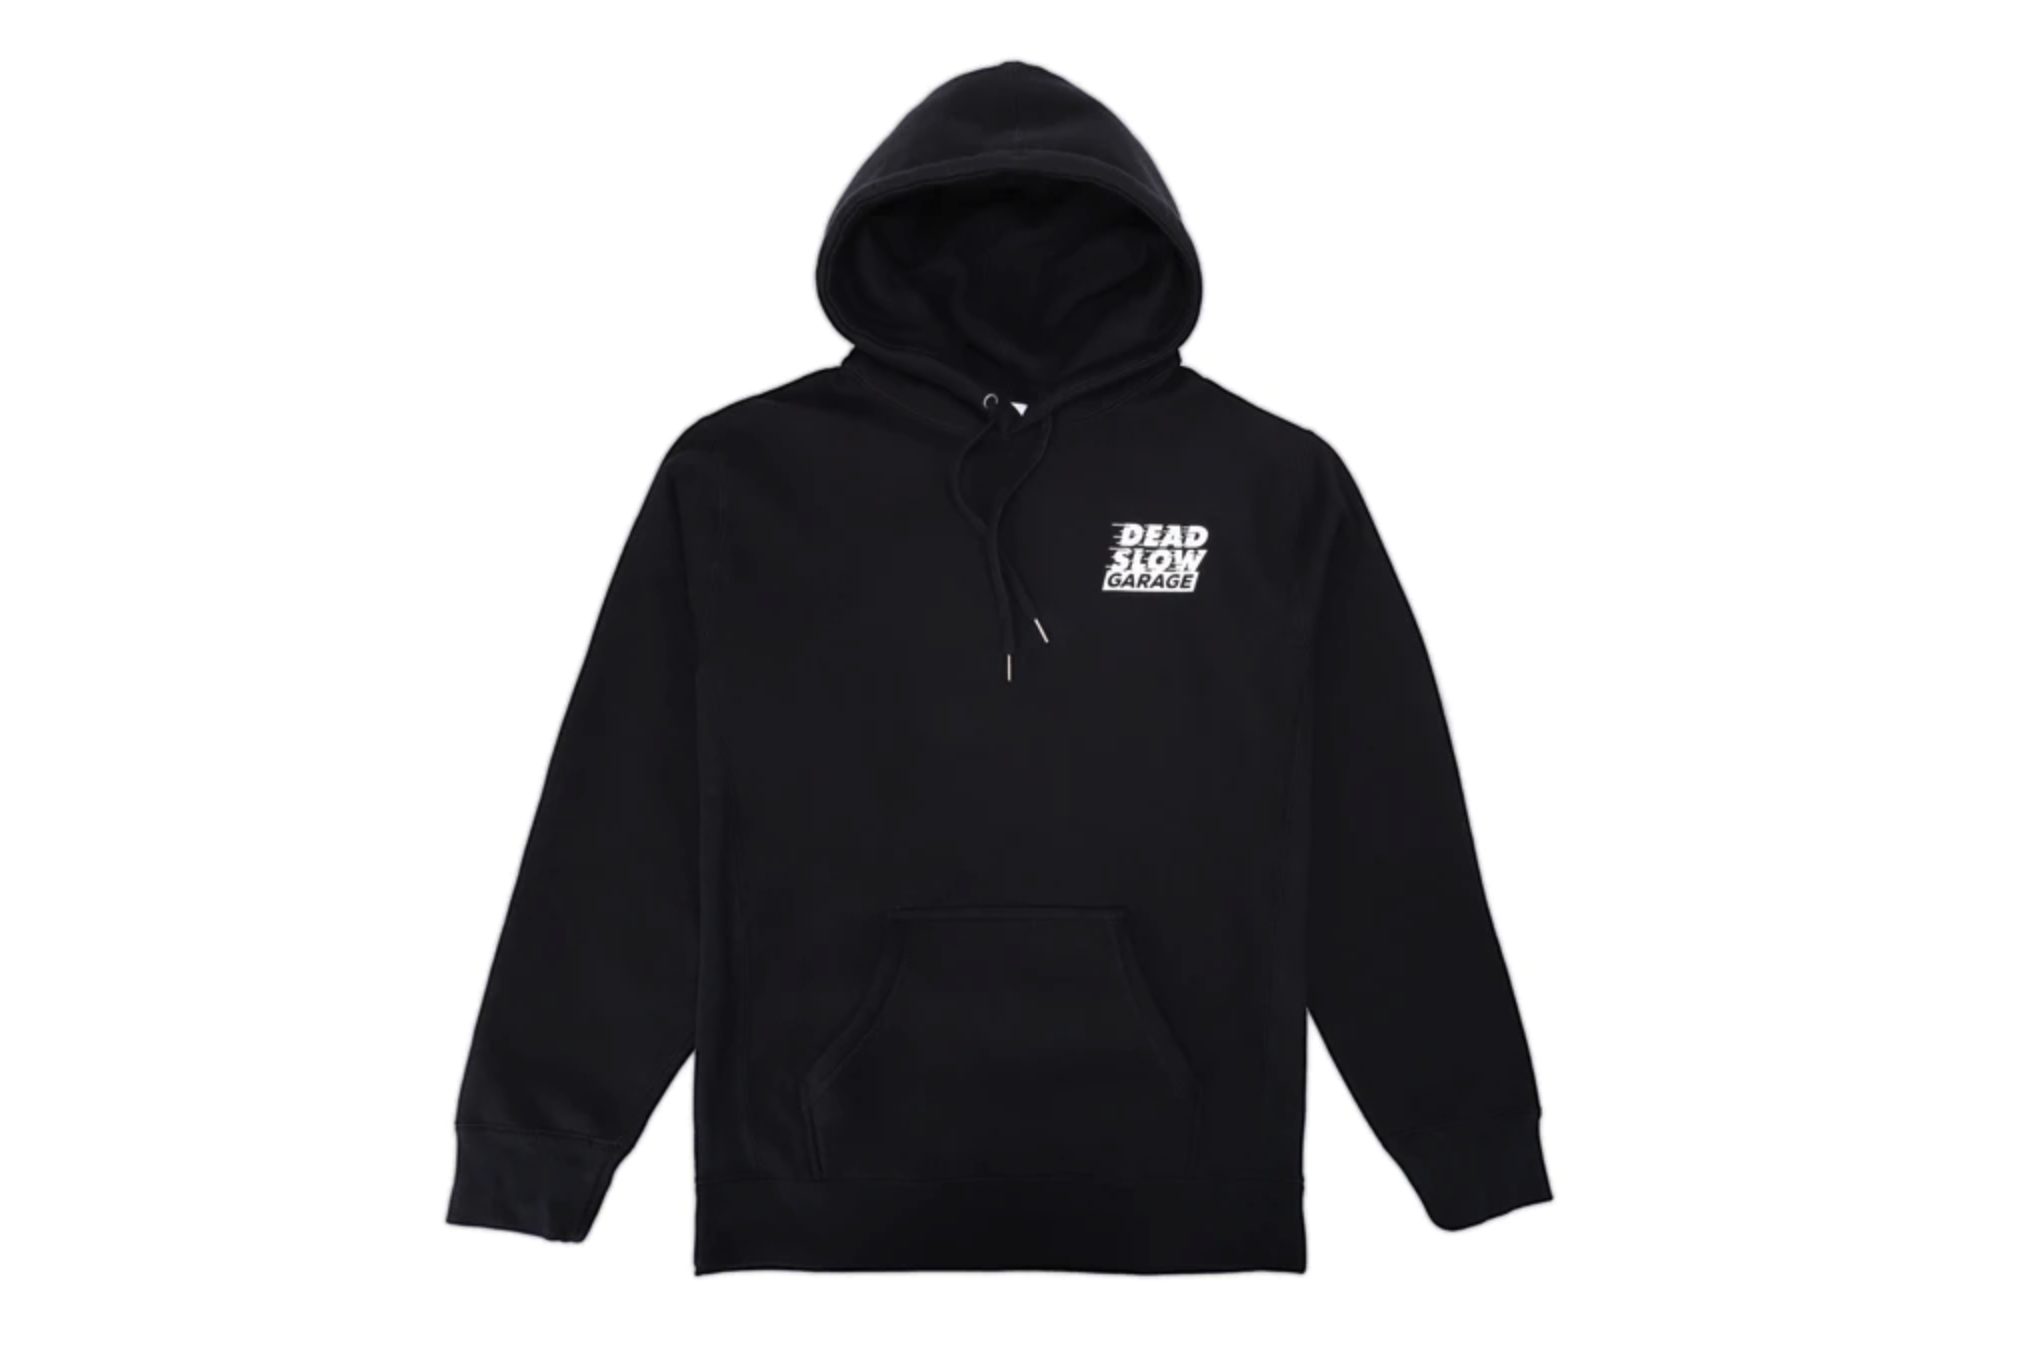 Stay Warm in Style: Get the New Dead Slow Garage Branded Hoodie!